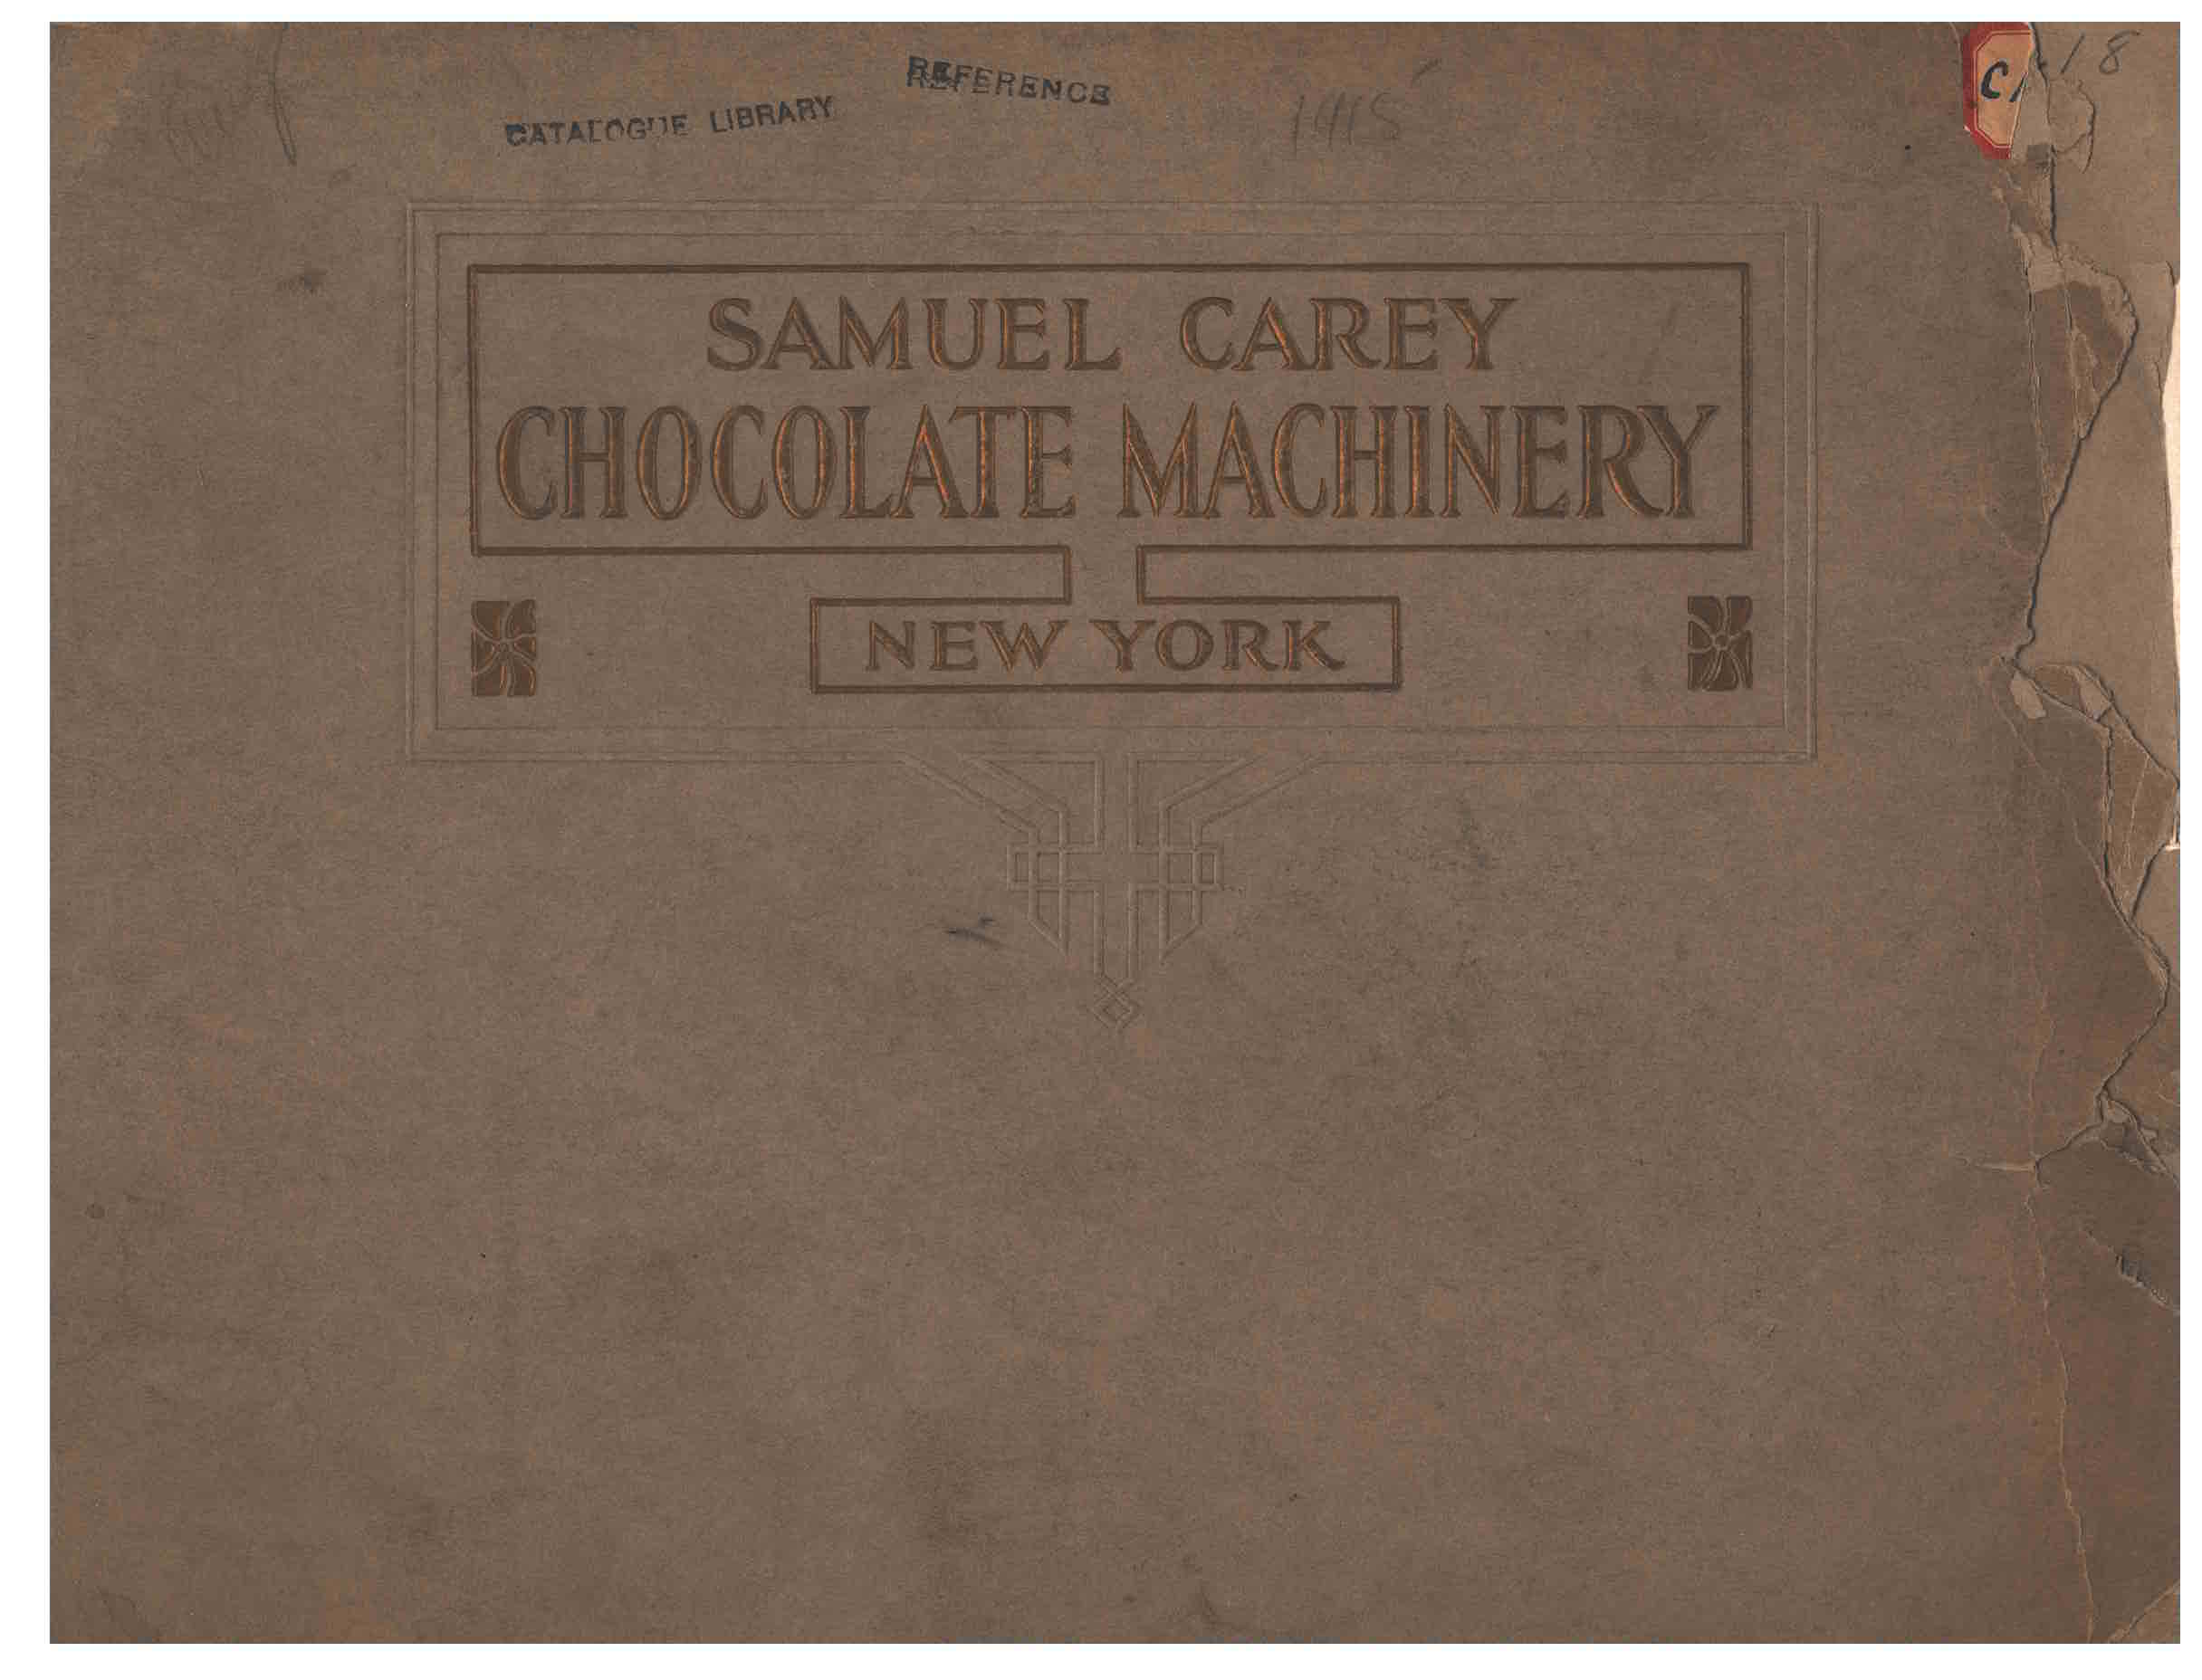 front cover of Saumel Carey Chocolate Machinery trade catalog